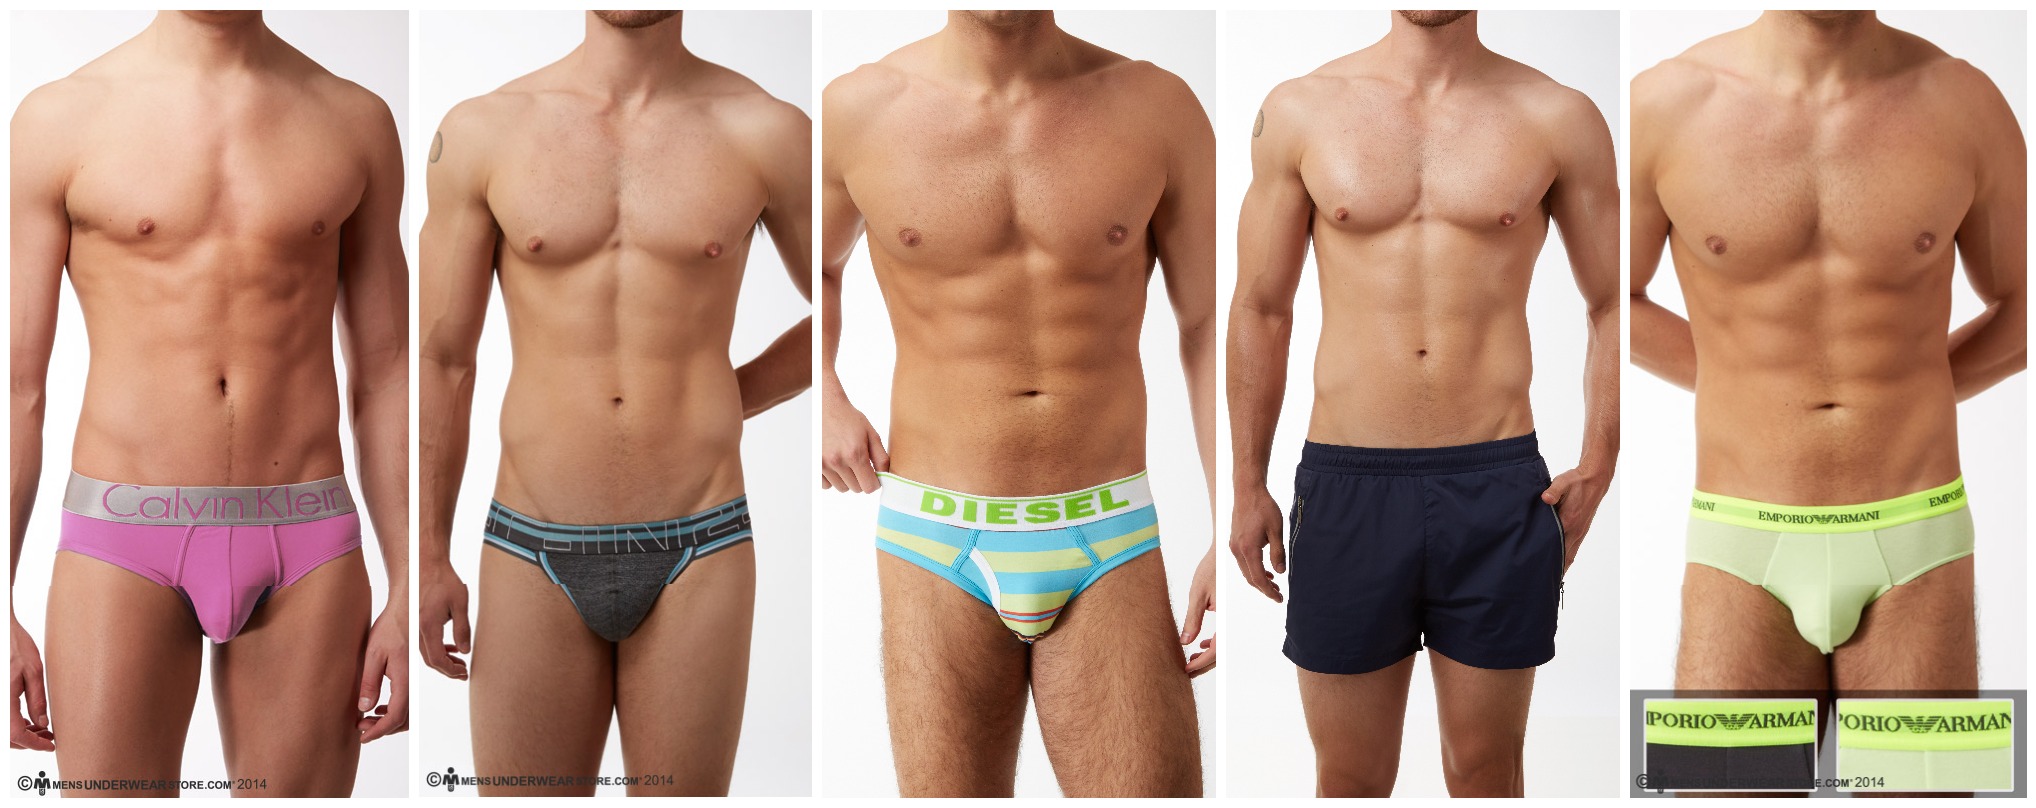 What's Hot in May in the US from Mensunderwearstore.com